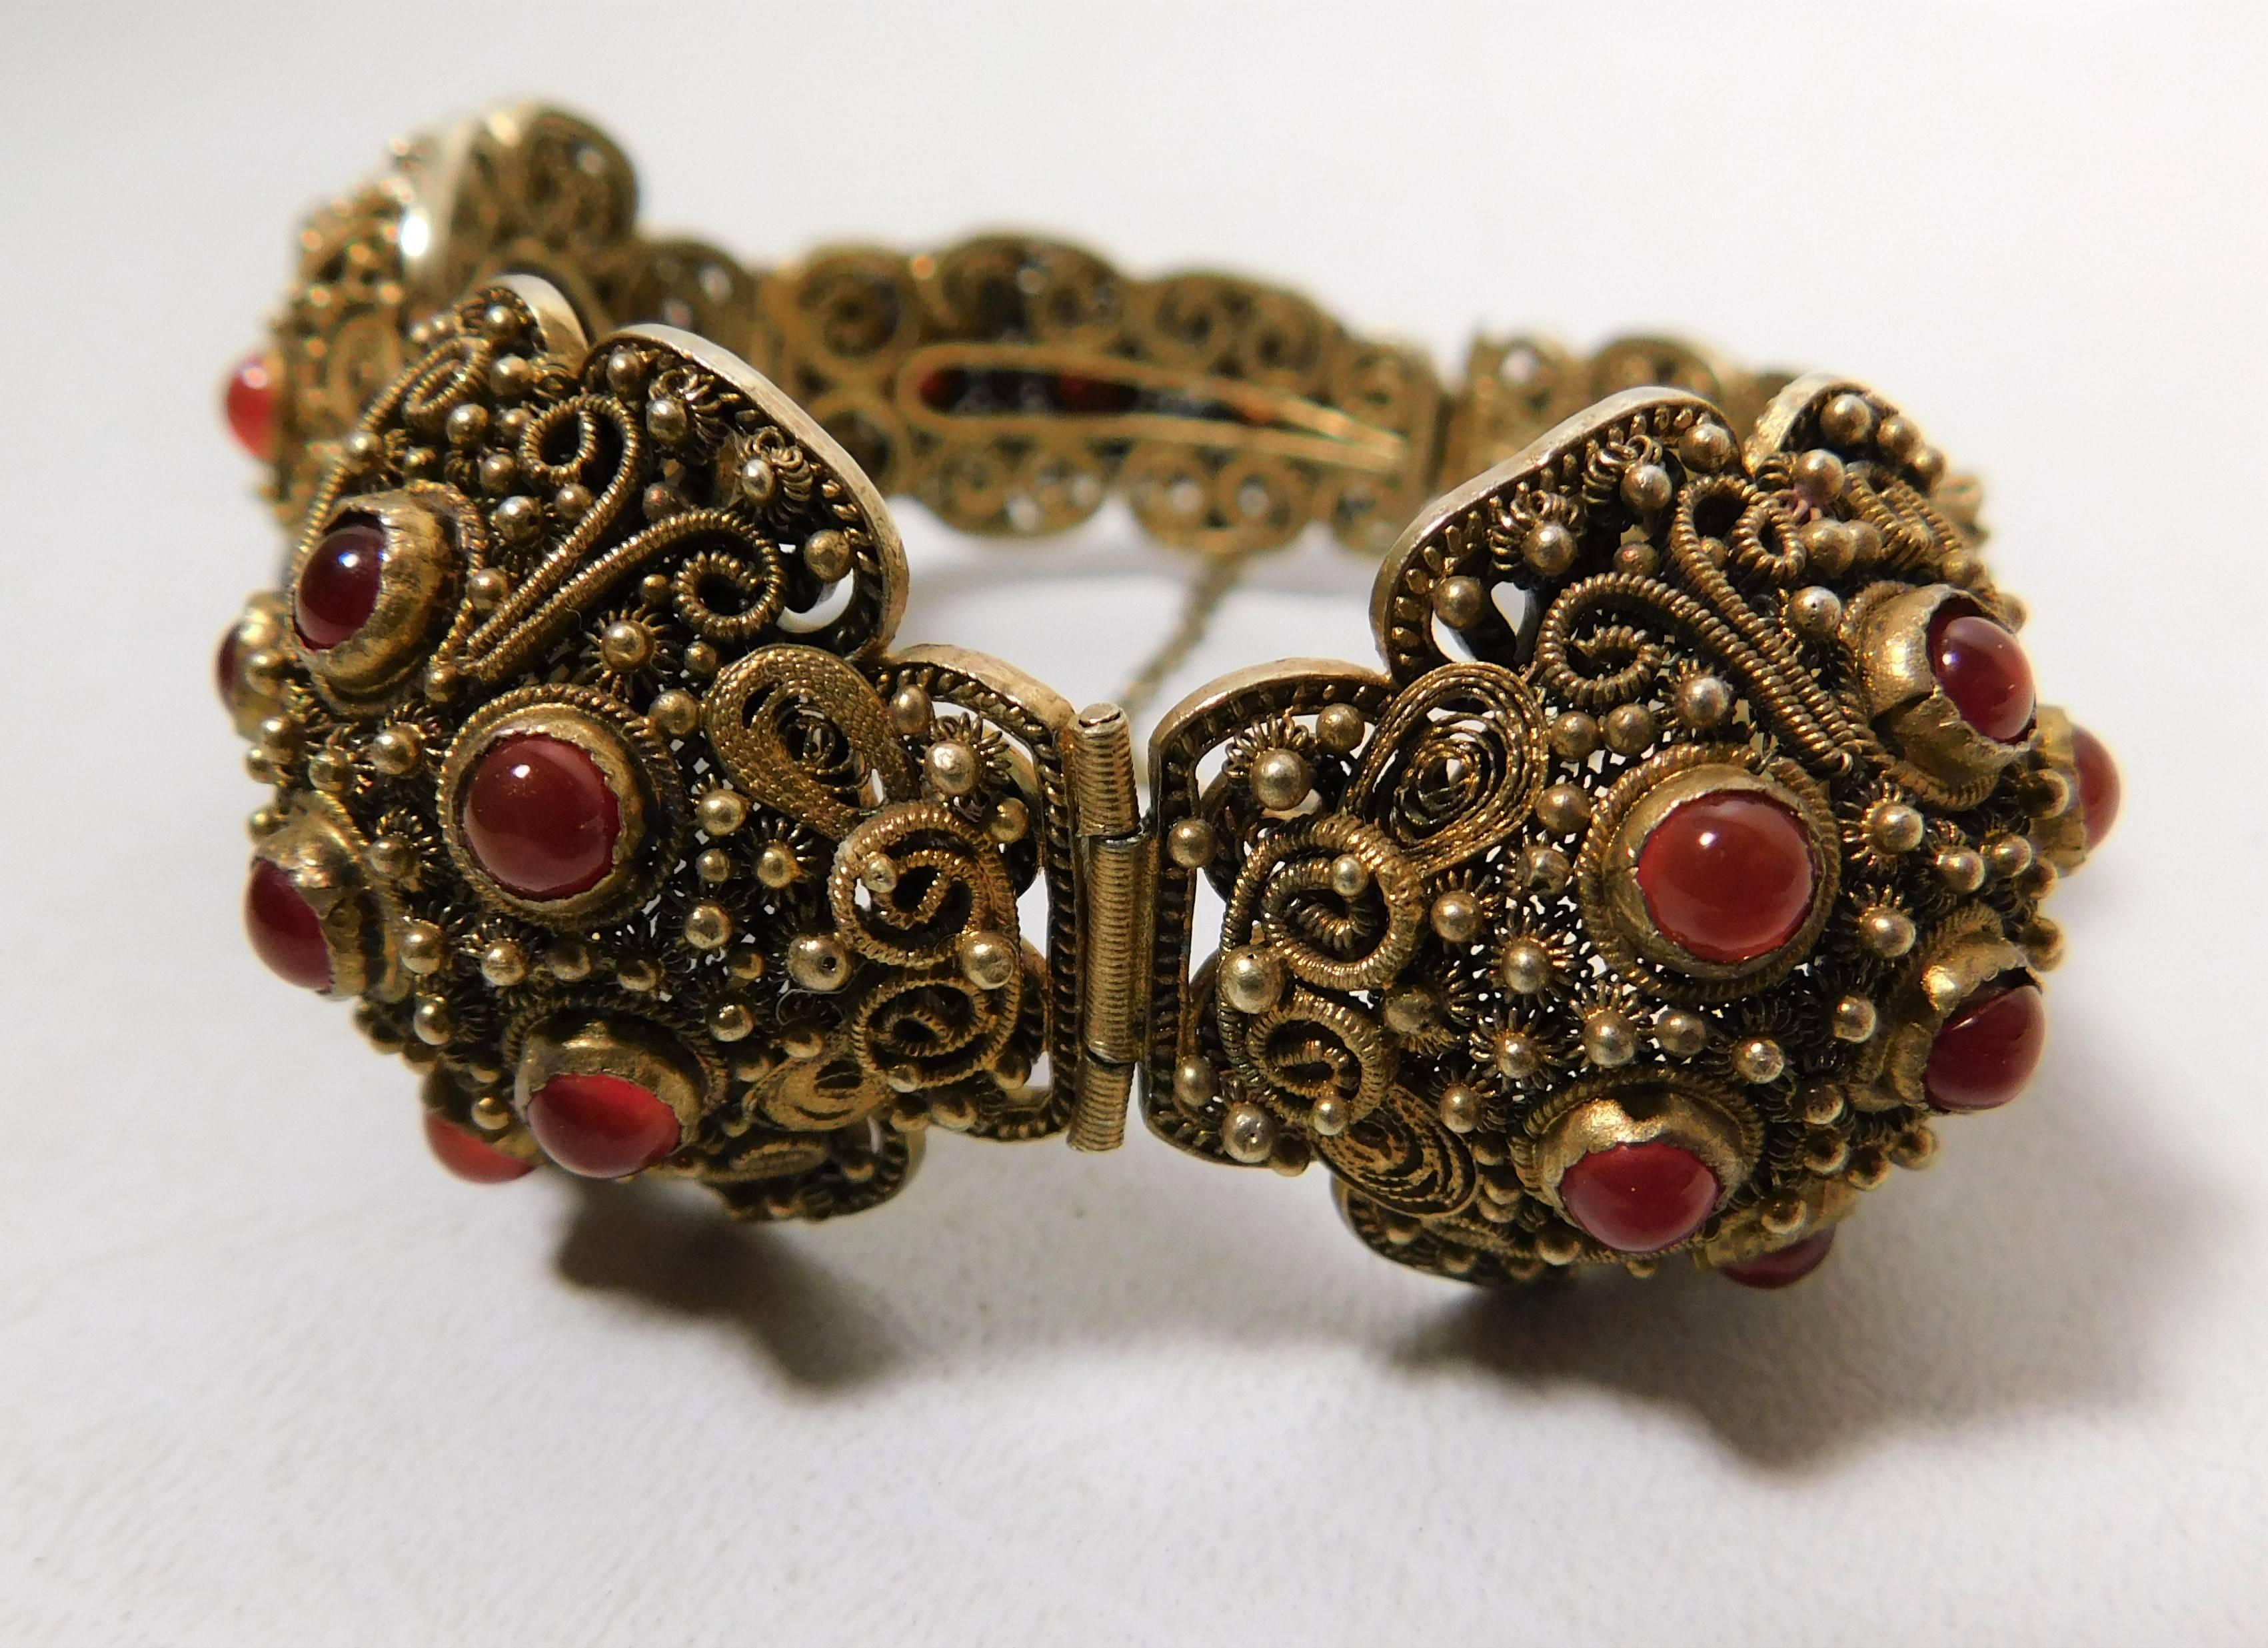 This early 20th century Chinese vermeil bracelet has 26 carnelian or pink coral stones.